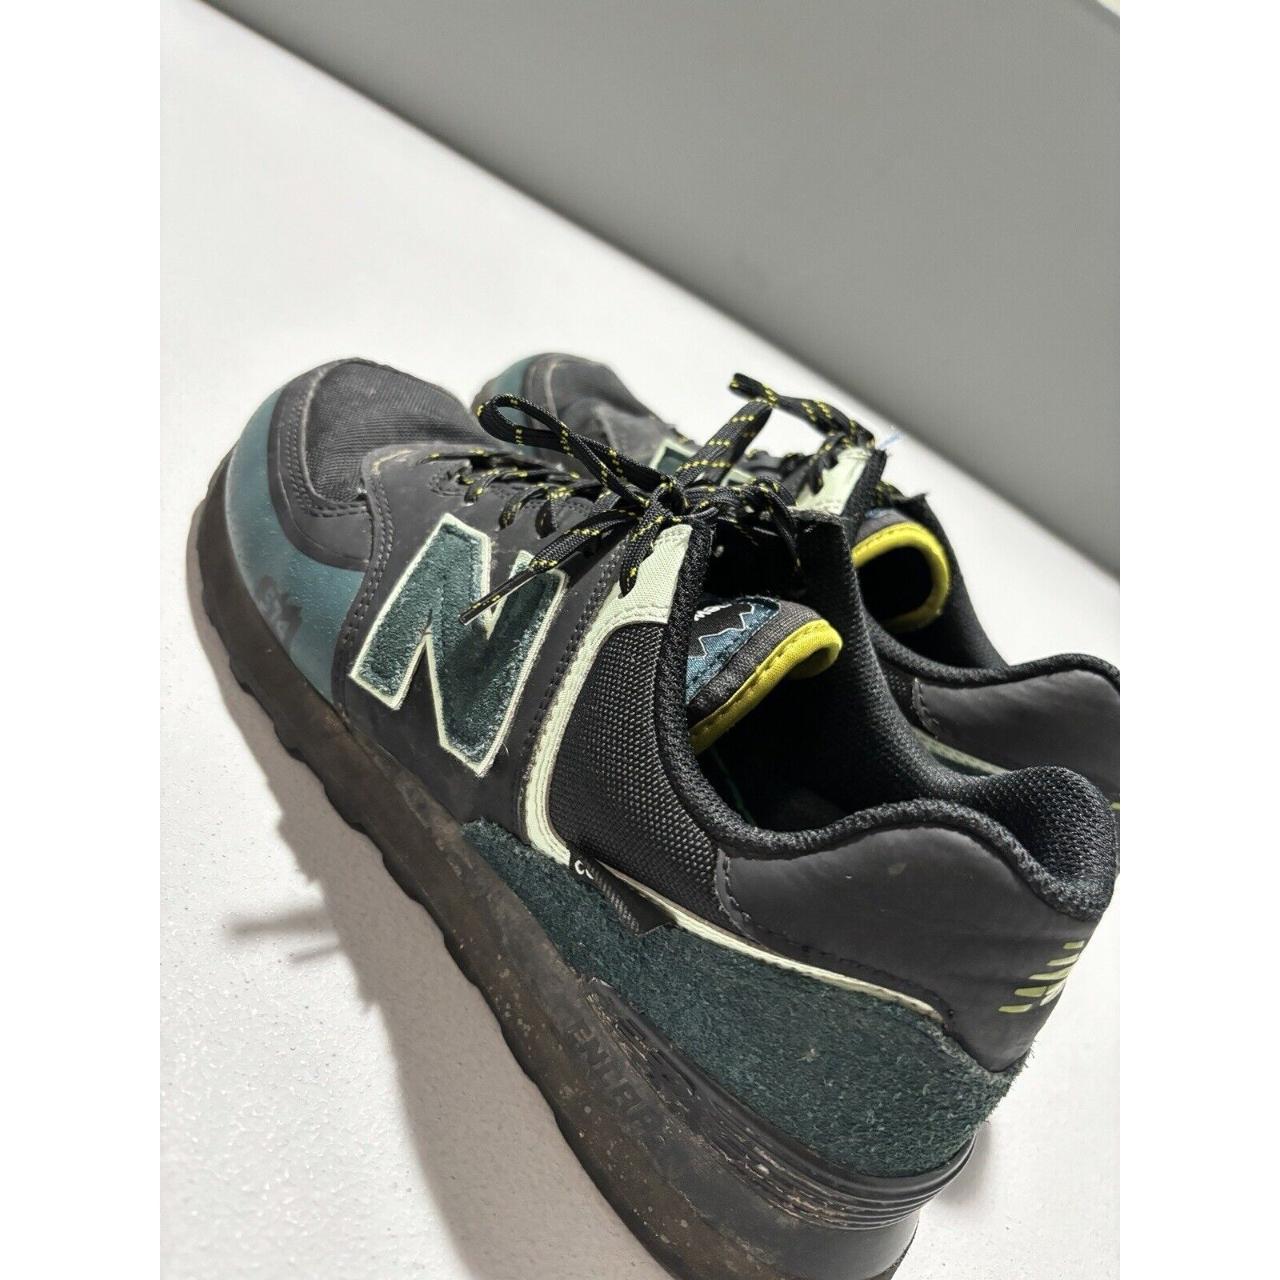 New Balance Men's Green and Black Trainers